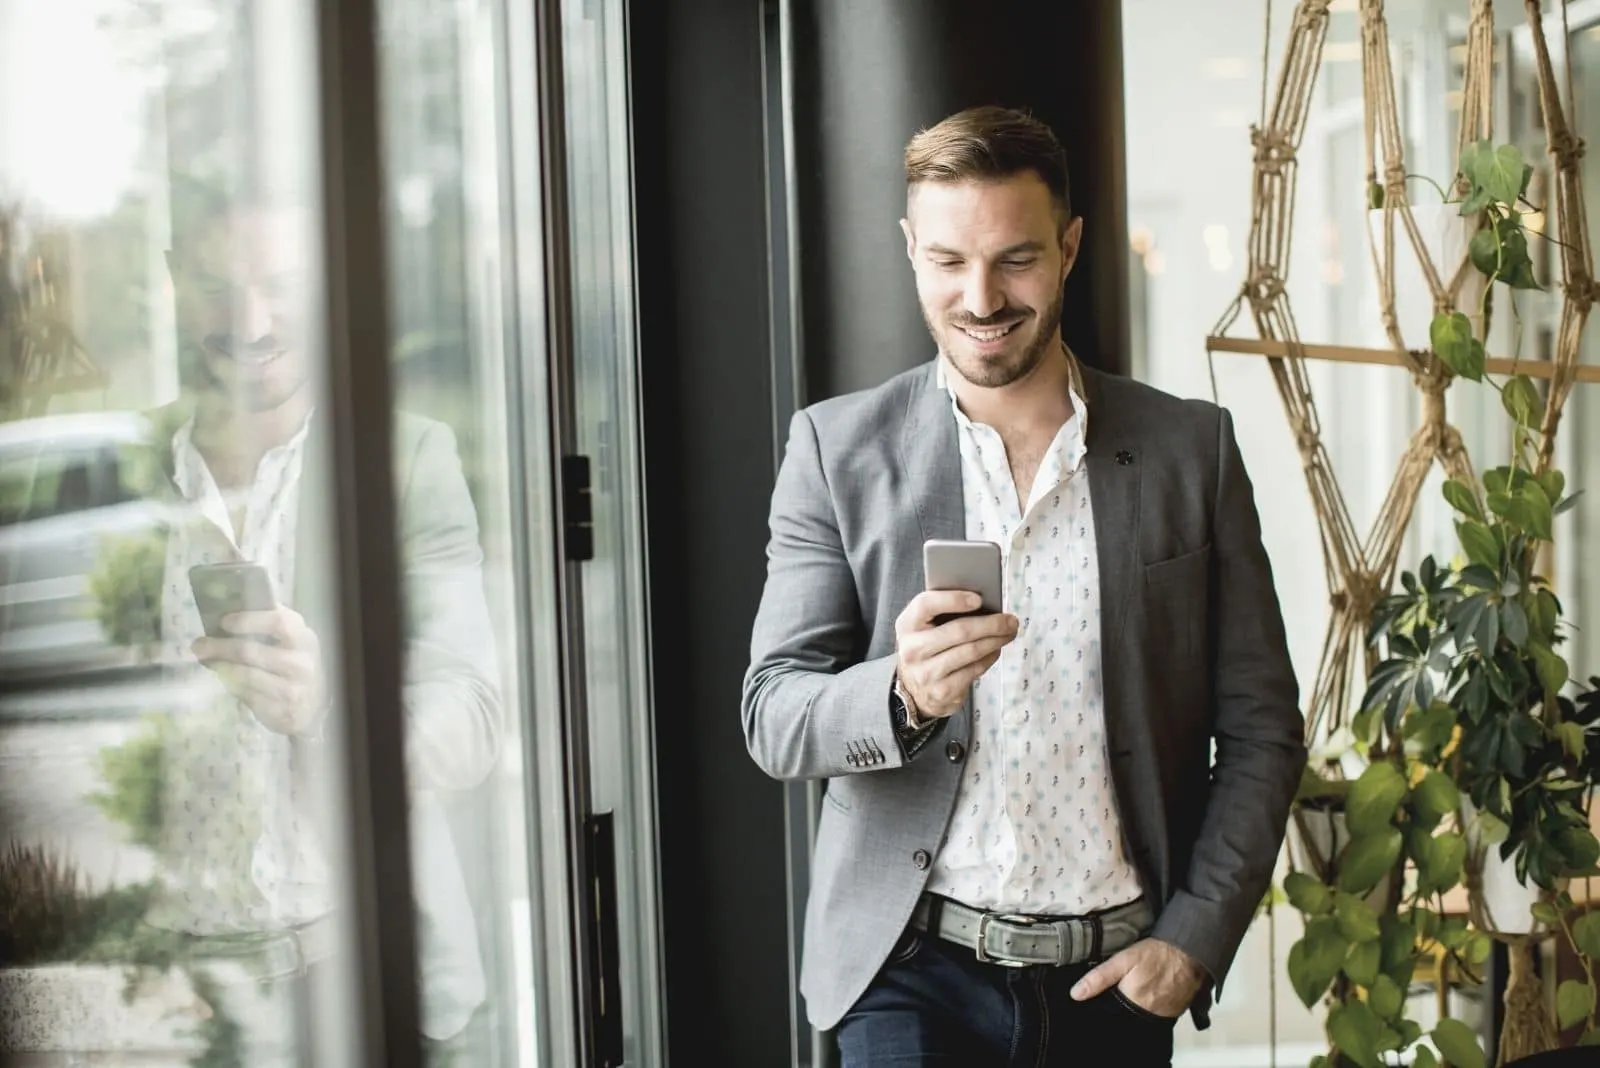 man standing inside the office smiling and looking at his phone with one hand on his pocket